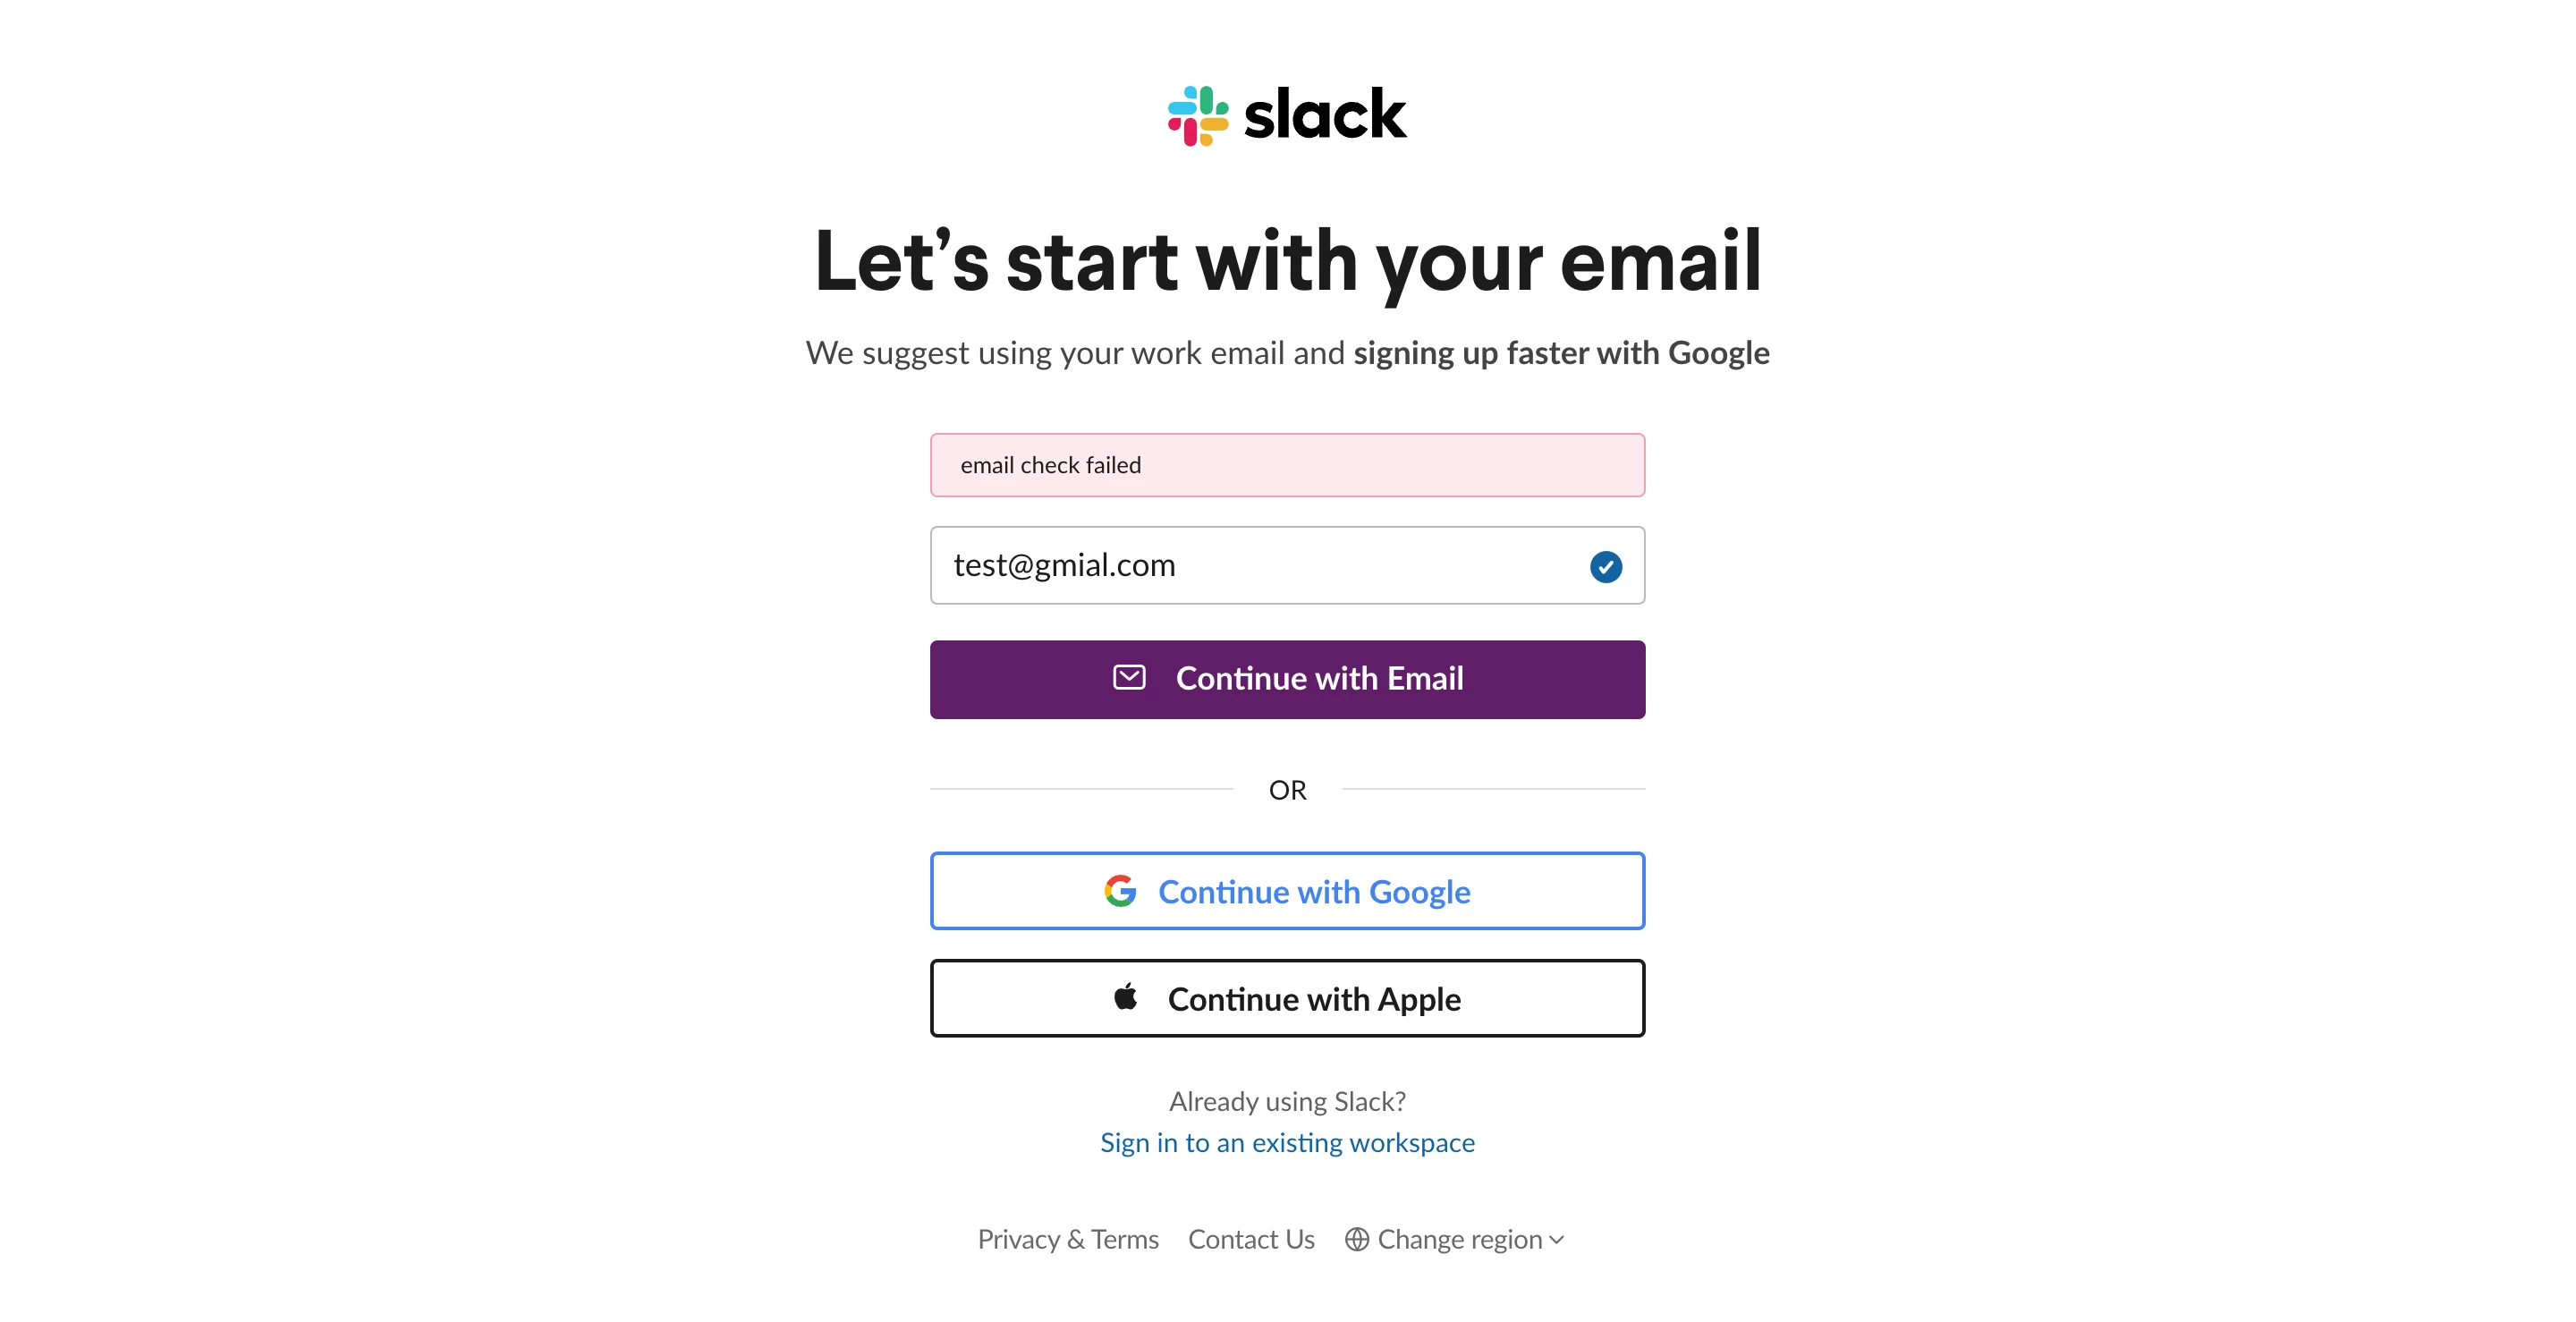 Slack's real-time email verification message.